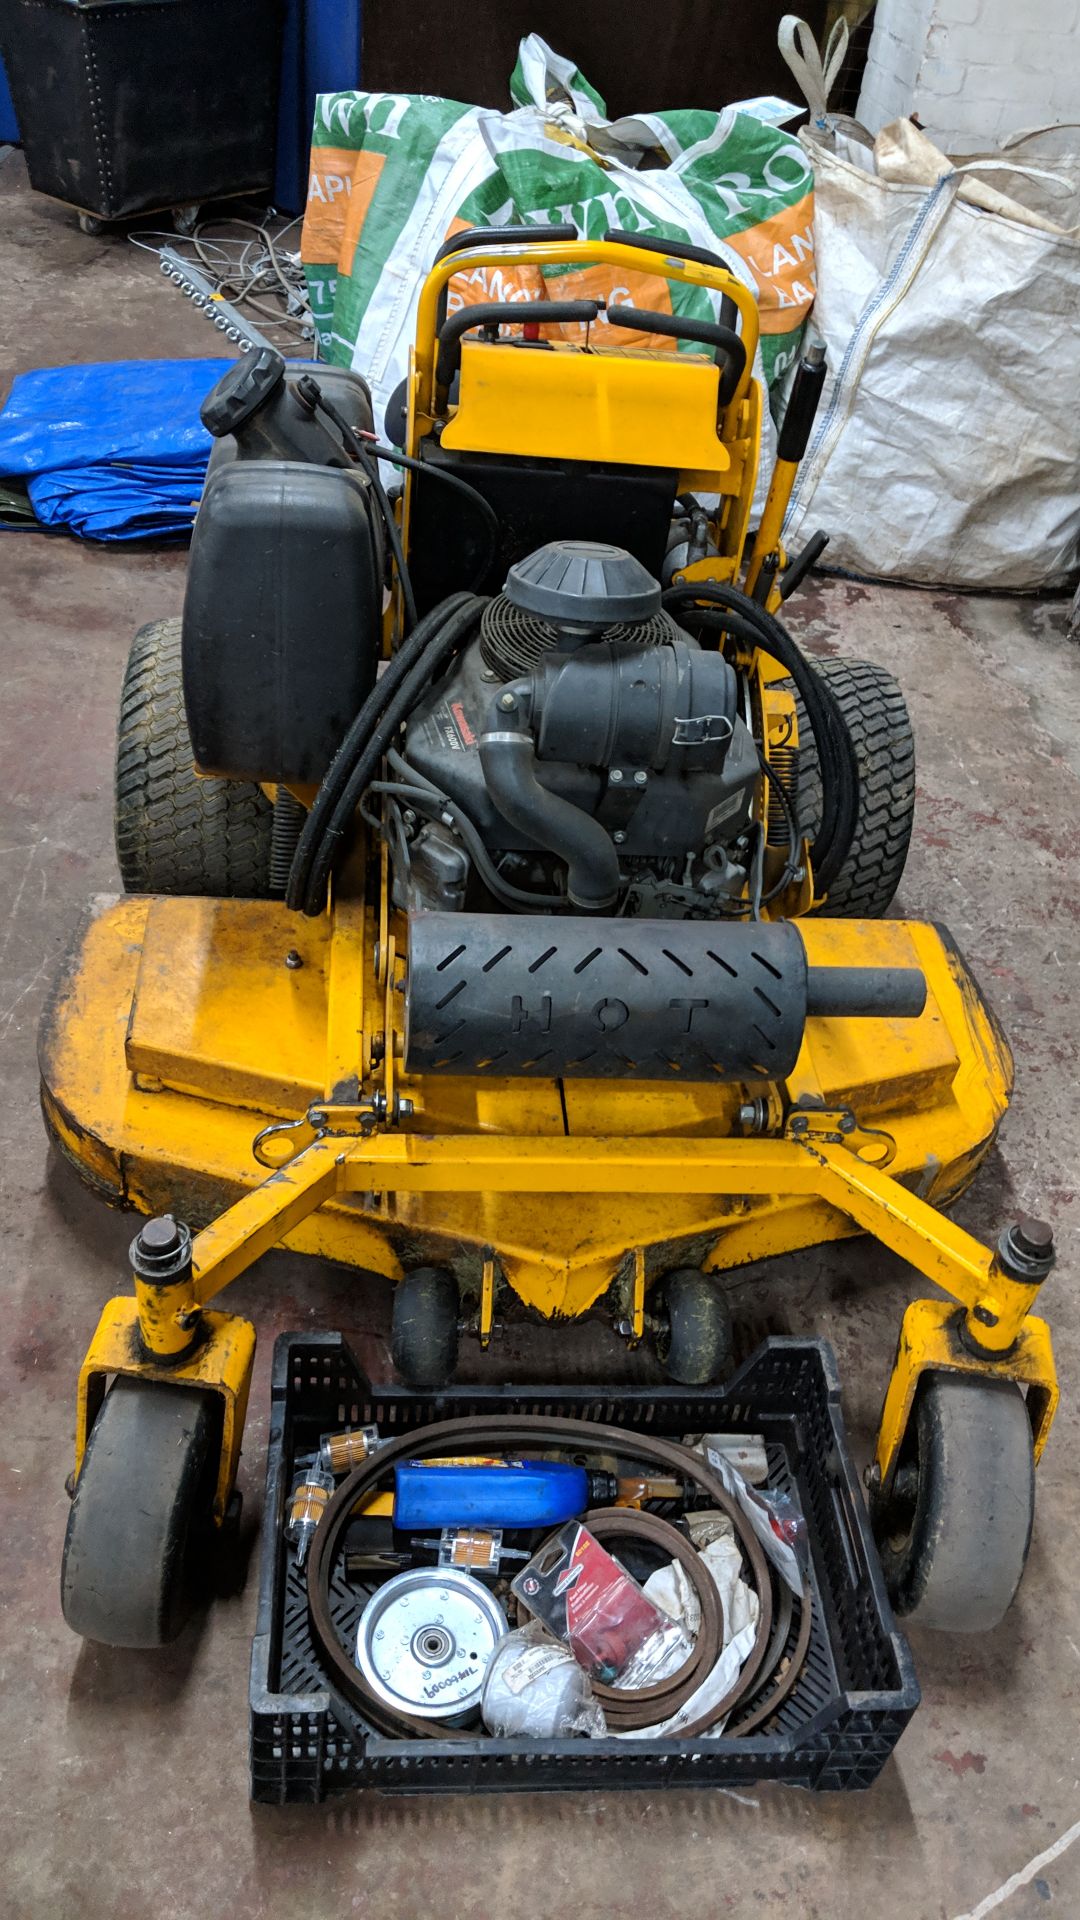 Hydro-gear ride-on rotary mower, hour gauge indicating 2,022.5 hours, powered by Kawasaki model - Image 21 of 21